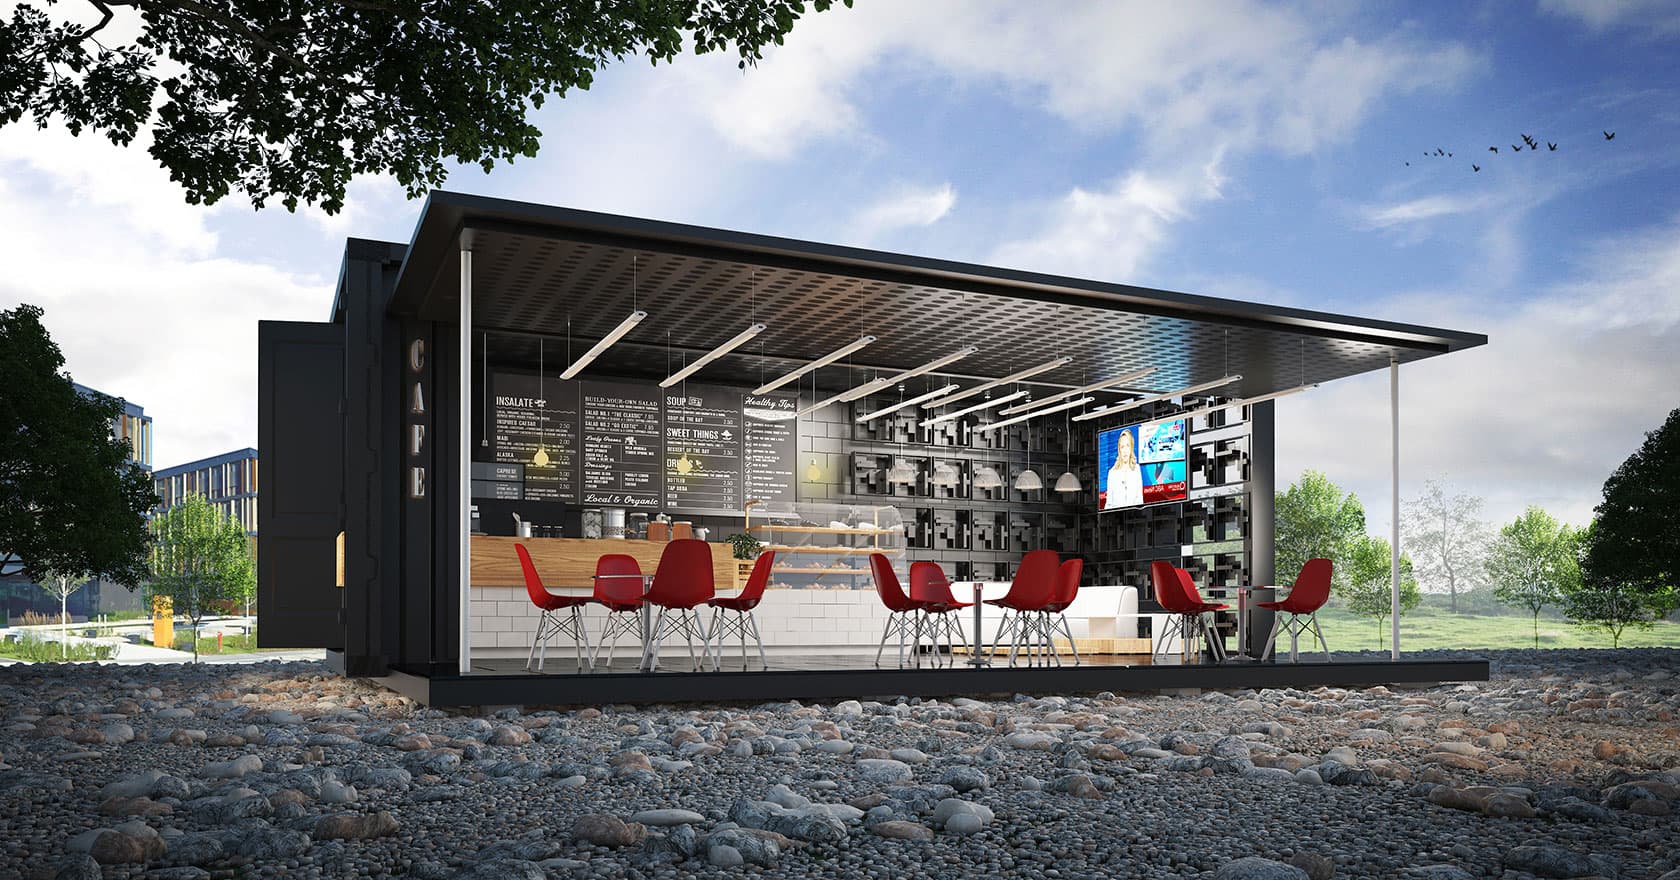 open-side-shipping-container-cafe-open-area